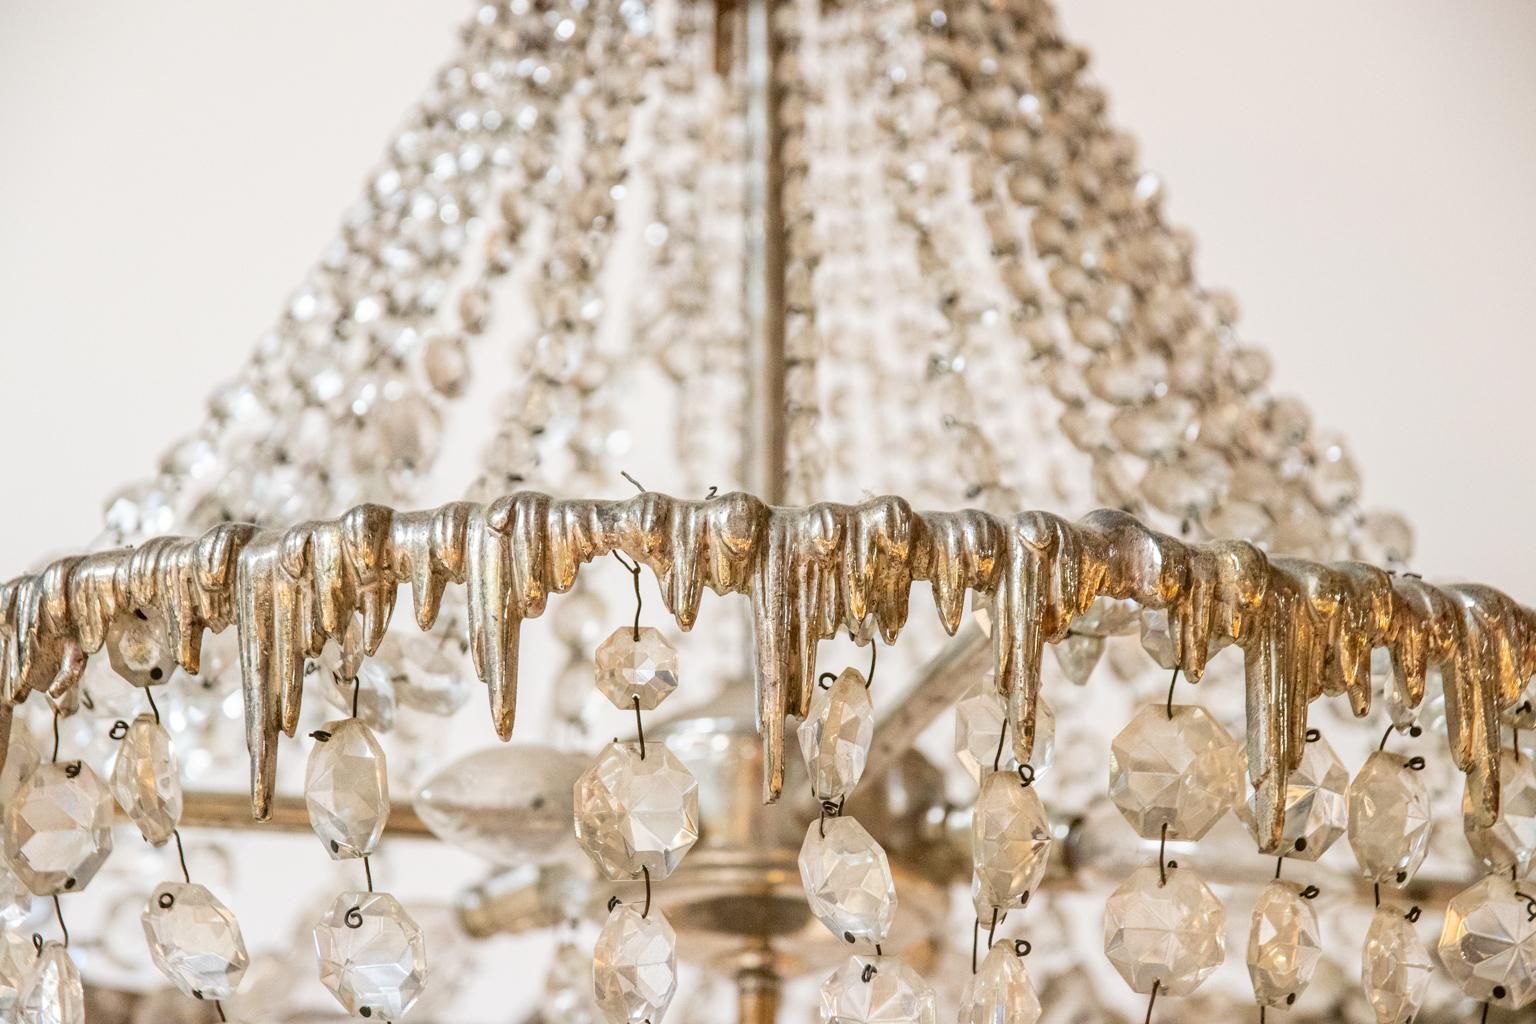 French two tier crystal chandelier with pendant metal drops throughout the circumference of the circular frame in the shape of icicles. The chandelier is further detailed with strands of crystal bead swags. Please note of wear consistent with age